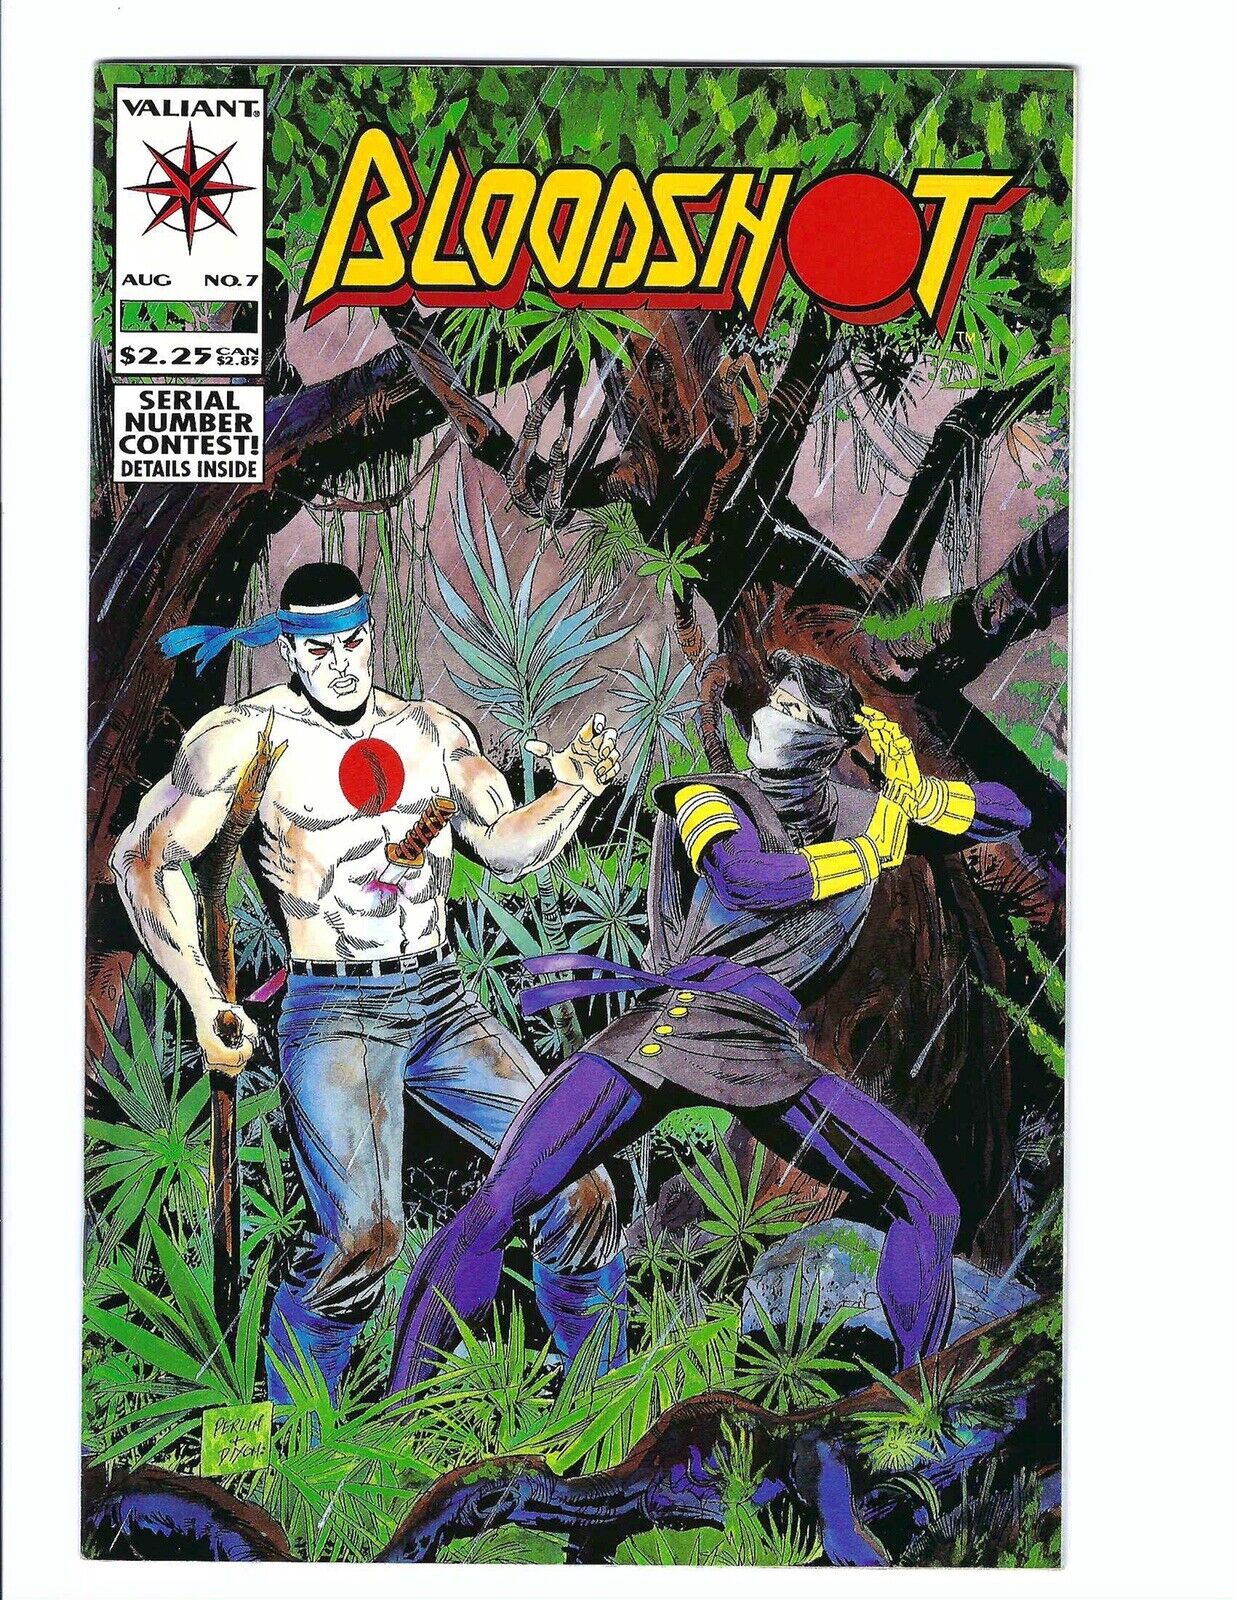 Bloodshot 7, NM- 9.2, Valiant 1993, 1st Ninjak In Costume With Card